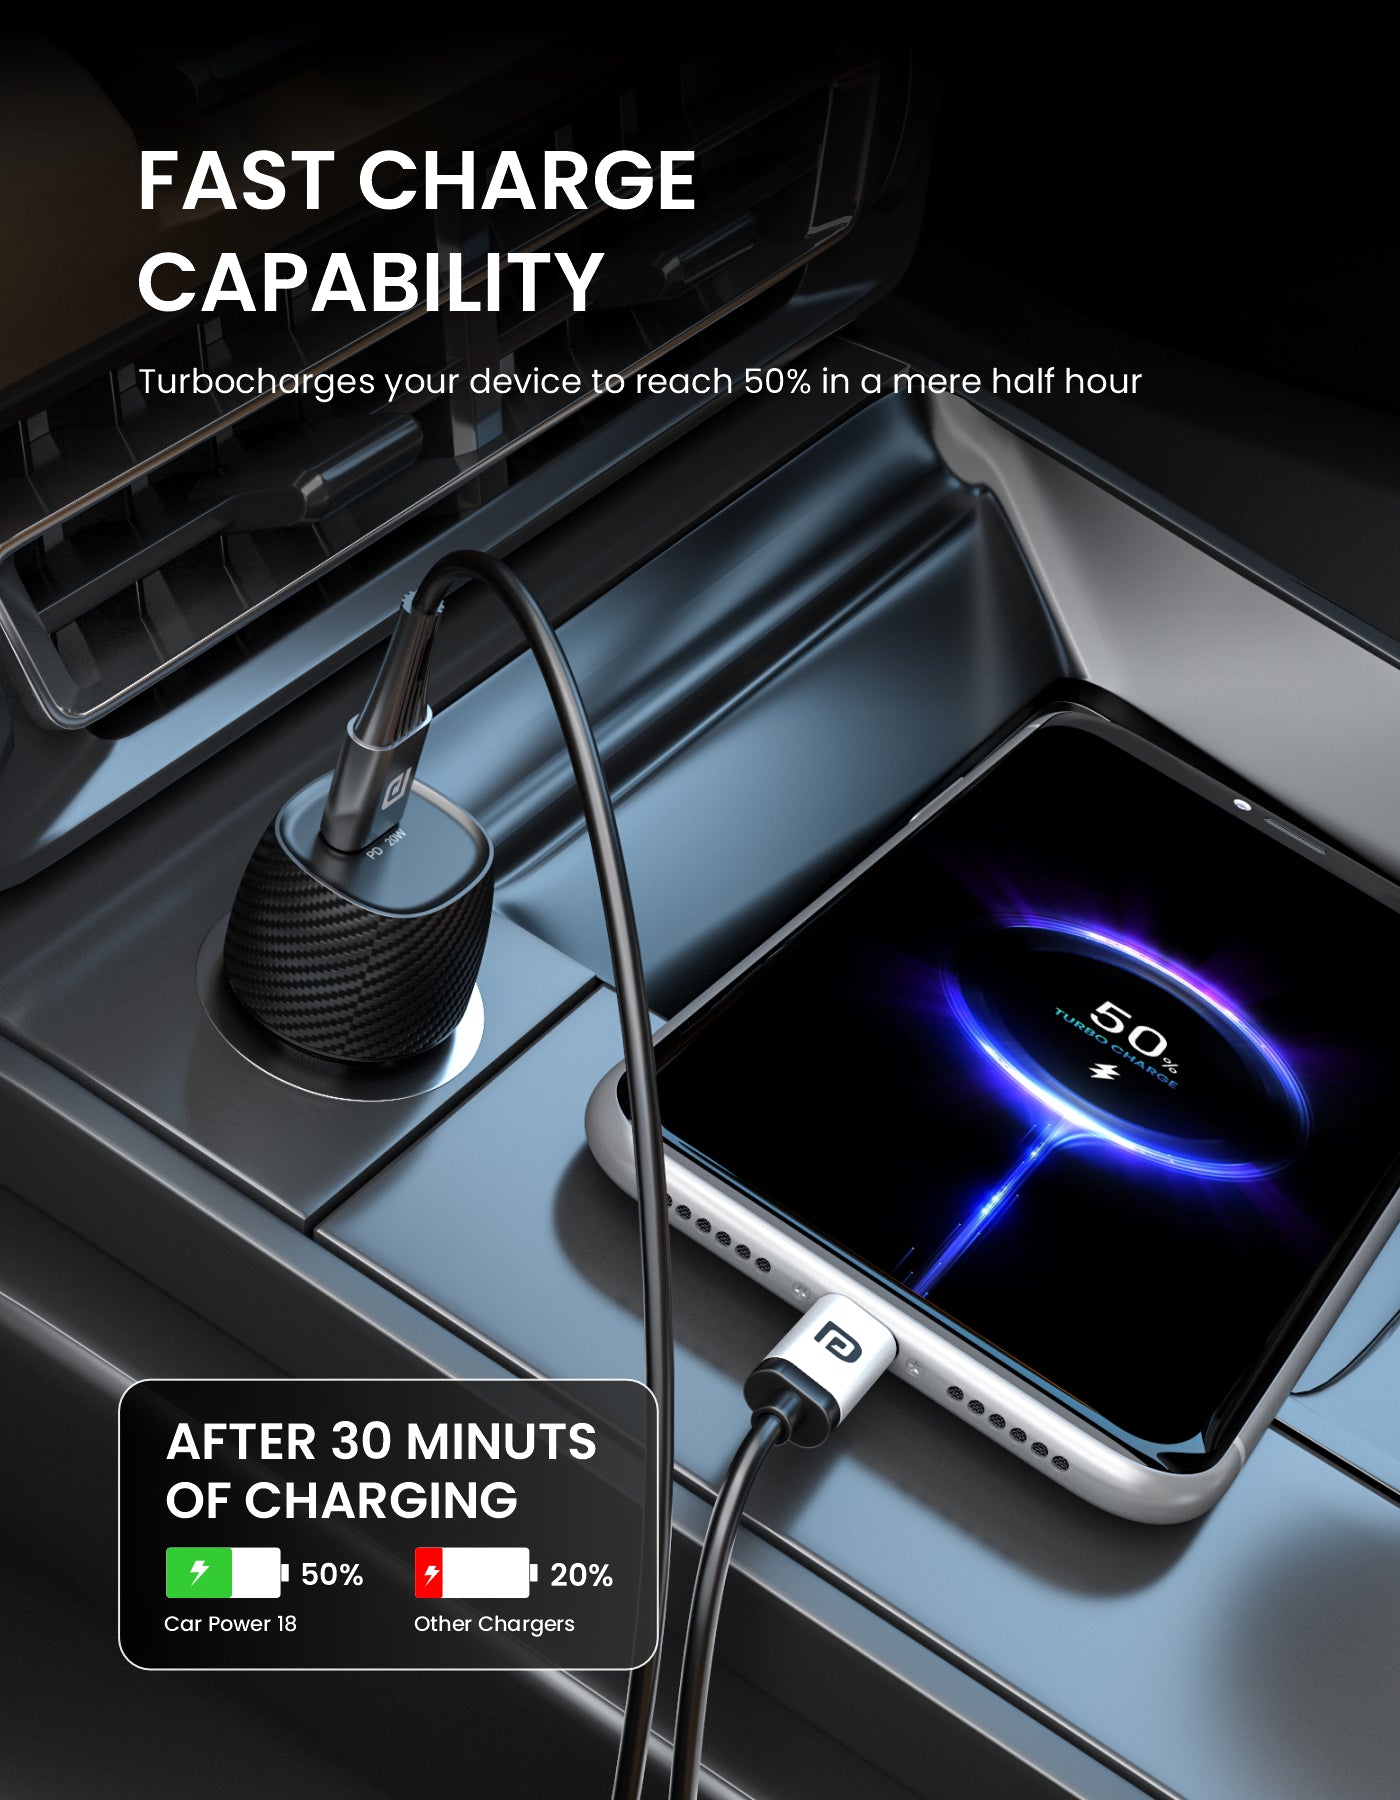 Portronics Car Power 18 - a fast car charger with dual USB ports